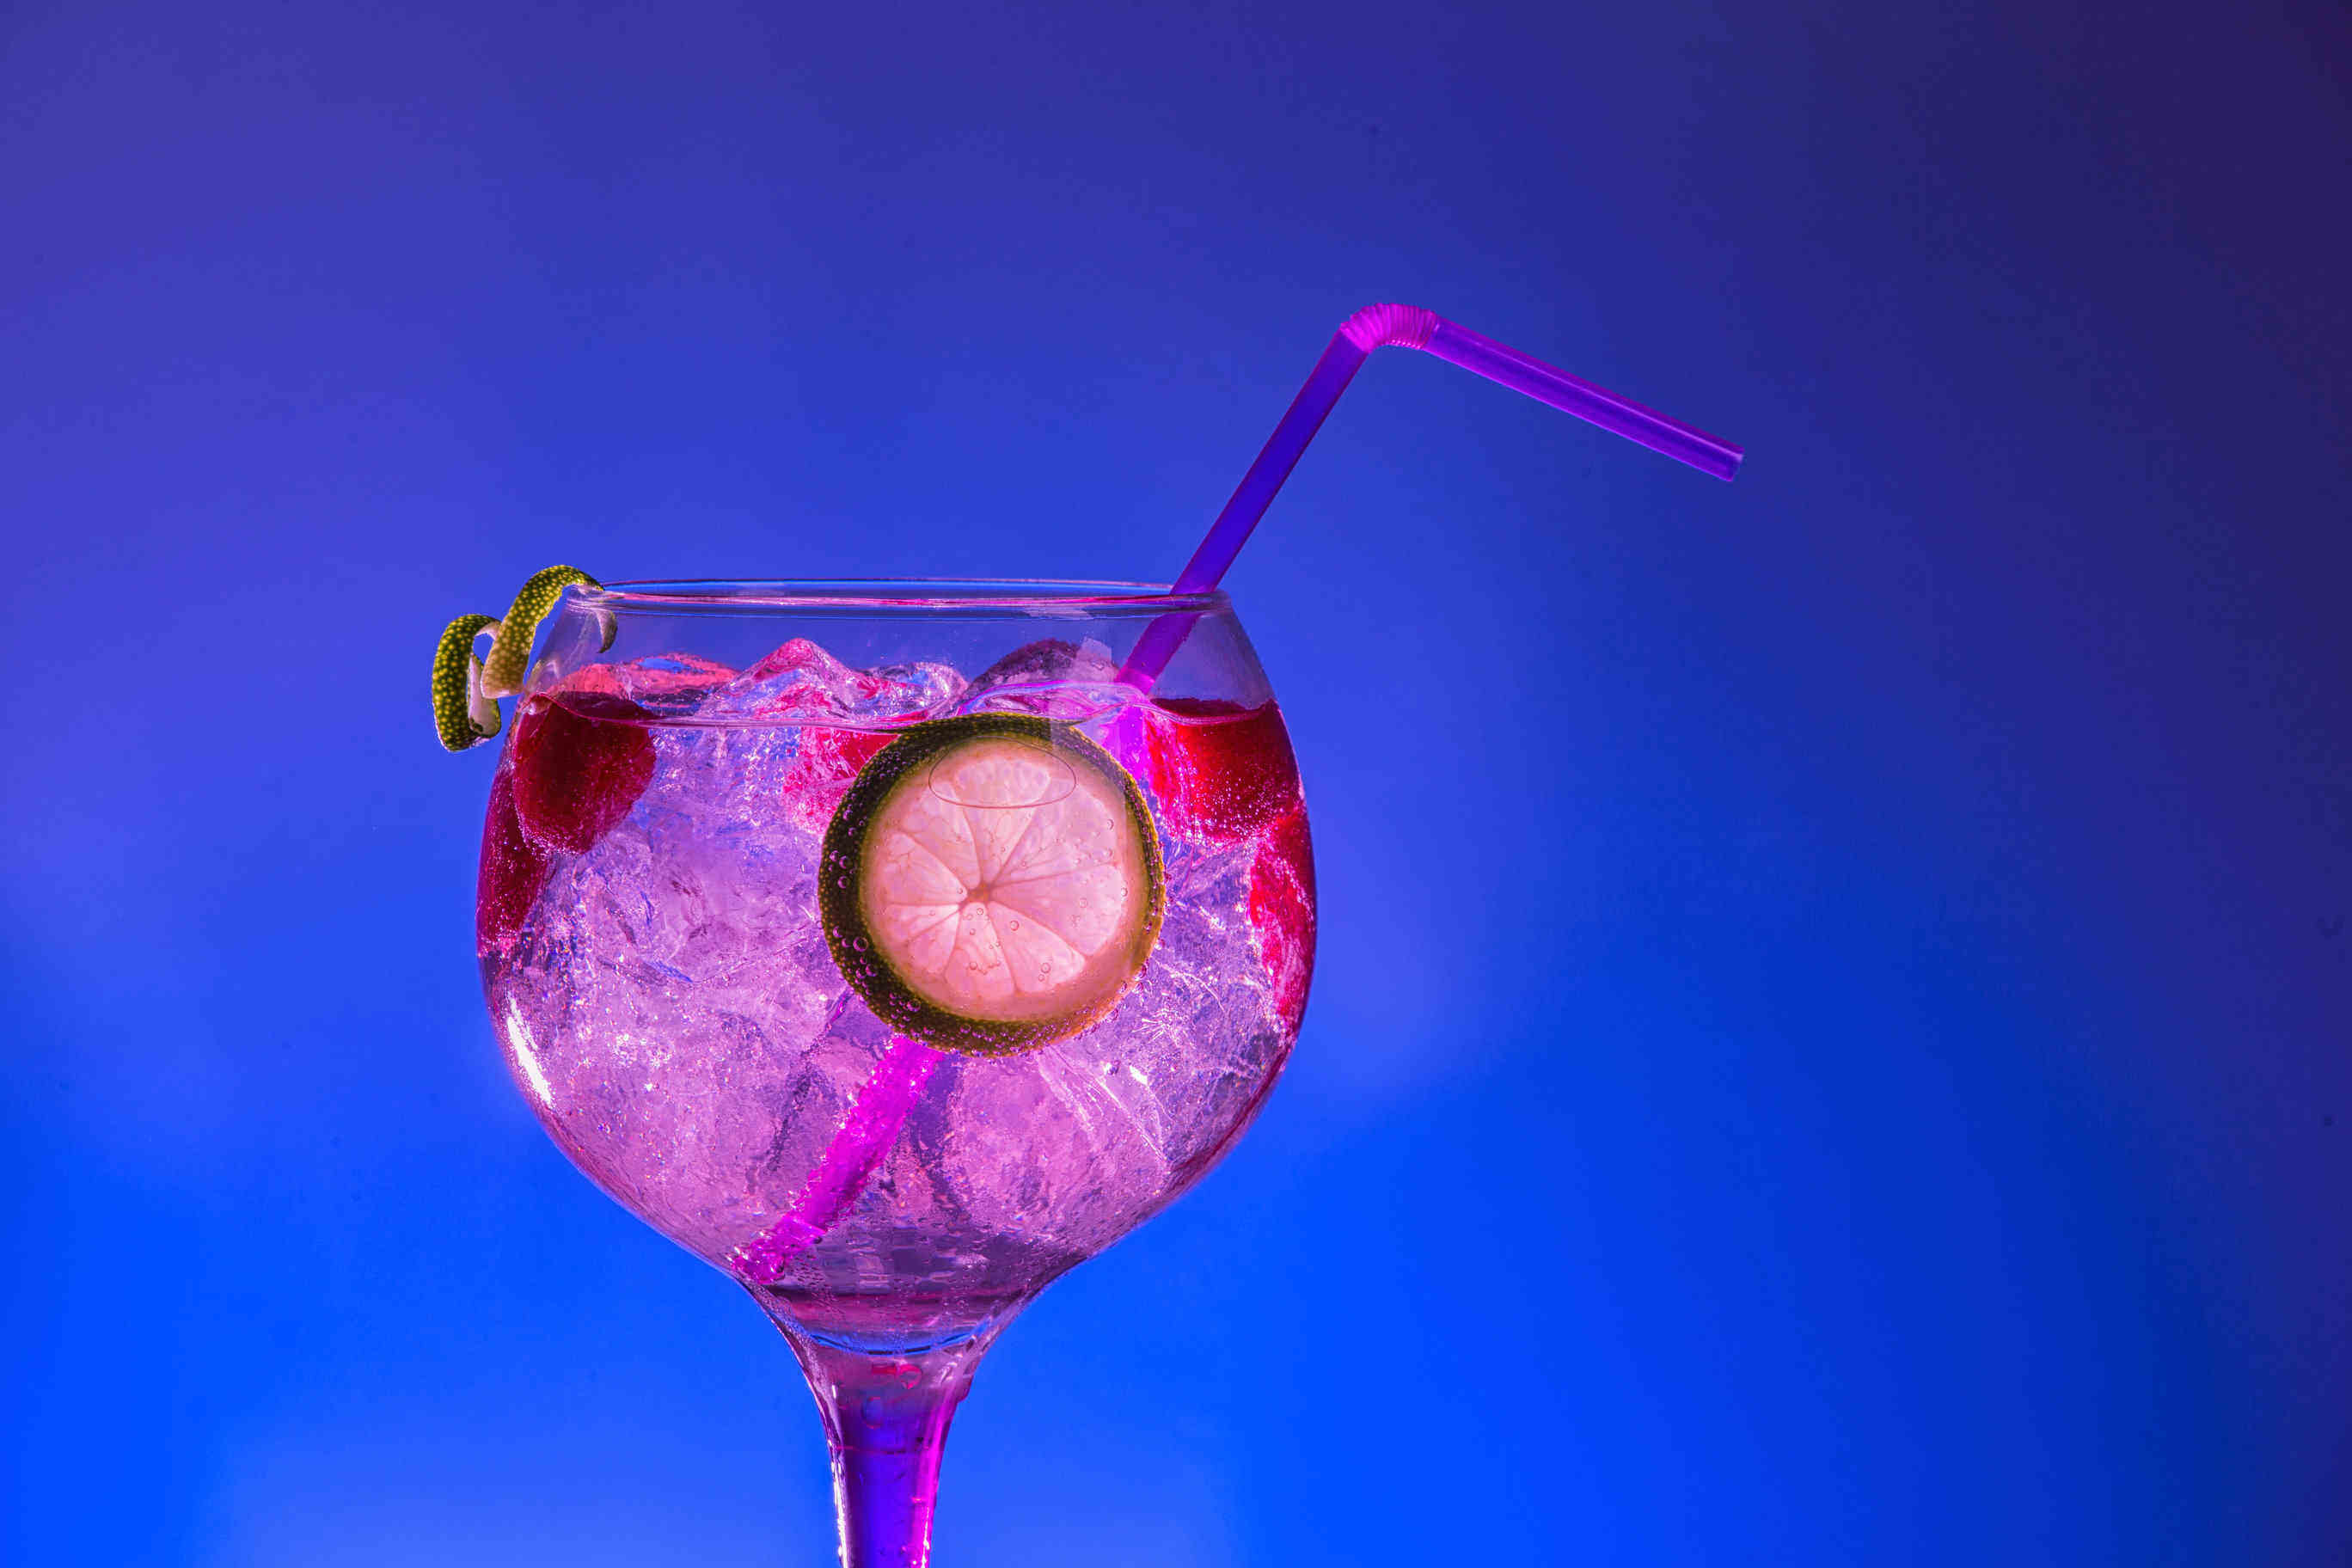 Irish consumers purchased over half-a-million bottles of pink gin last year.